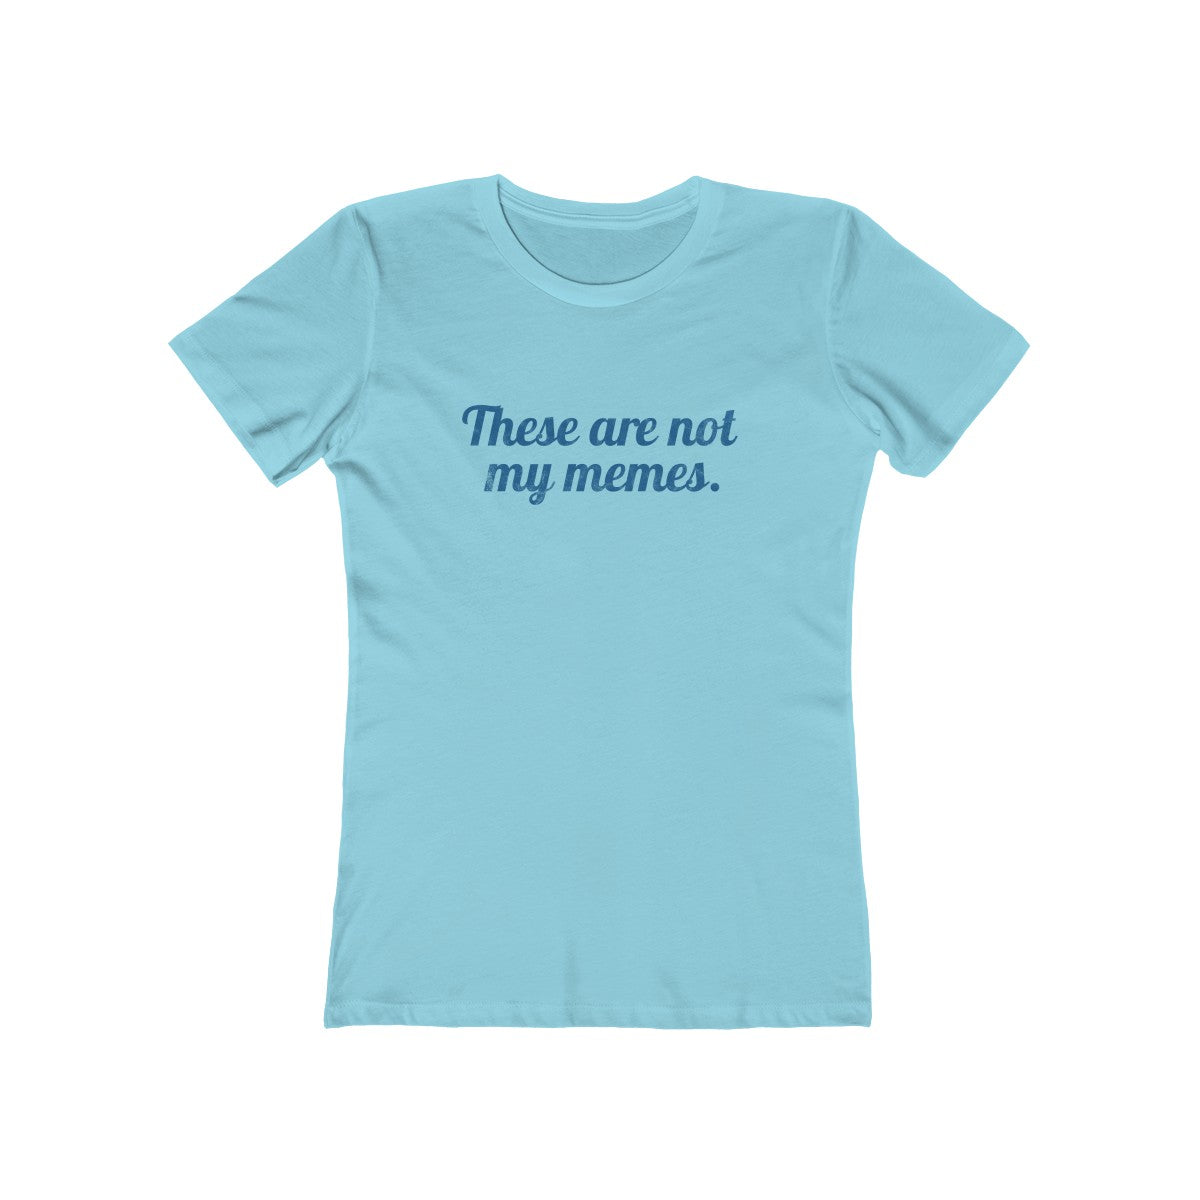 These Are Not My Memes . Blue Print . Women's Boyfriend Tee